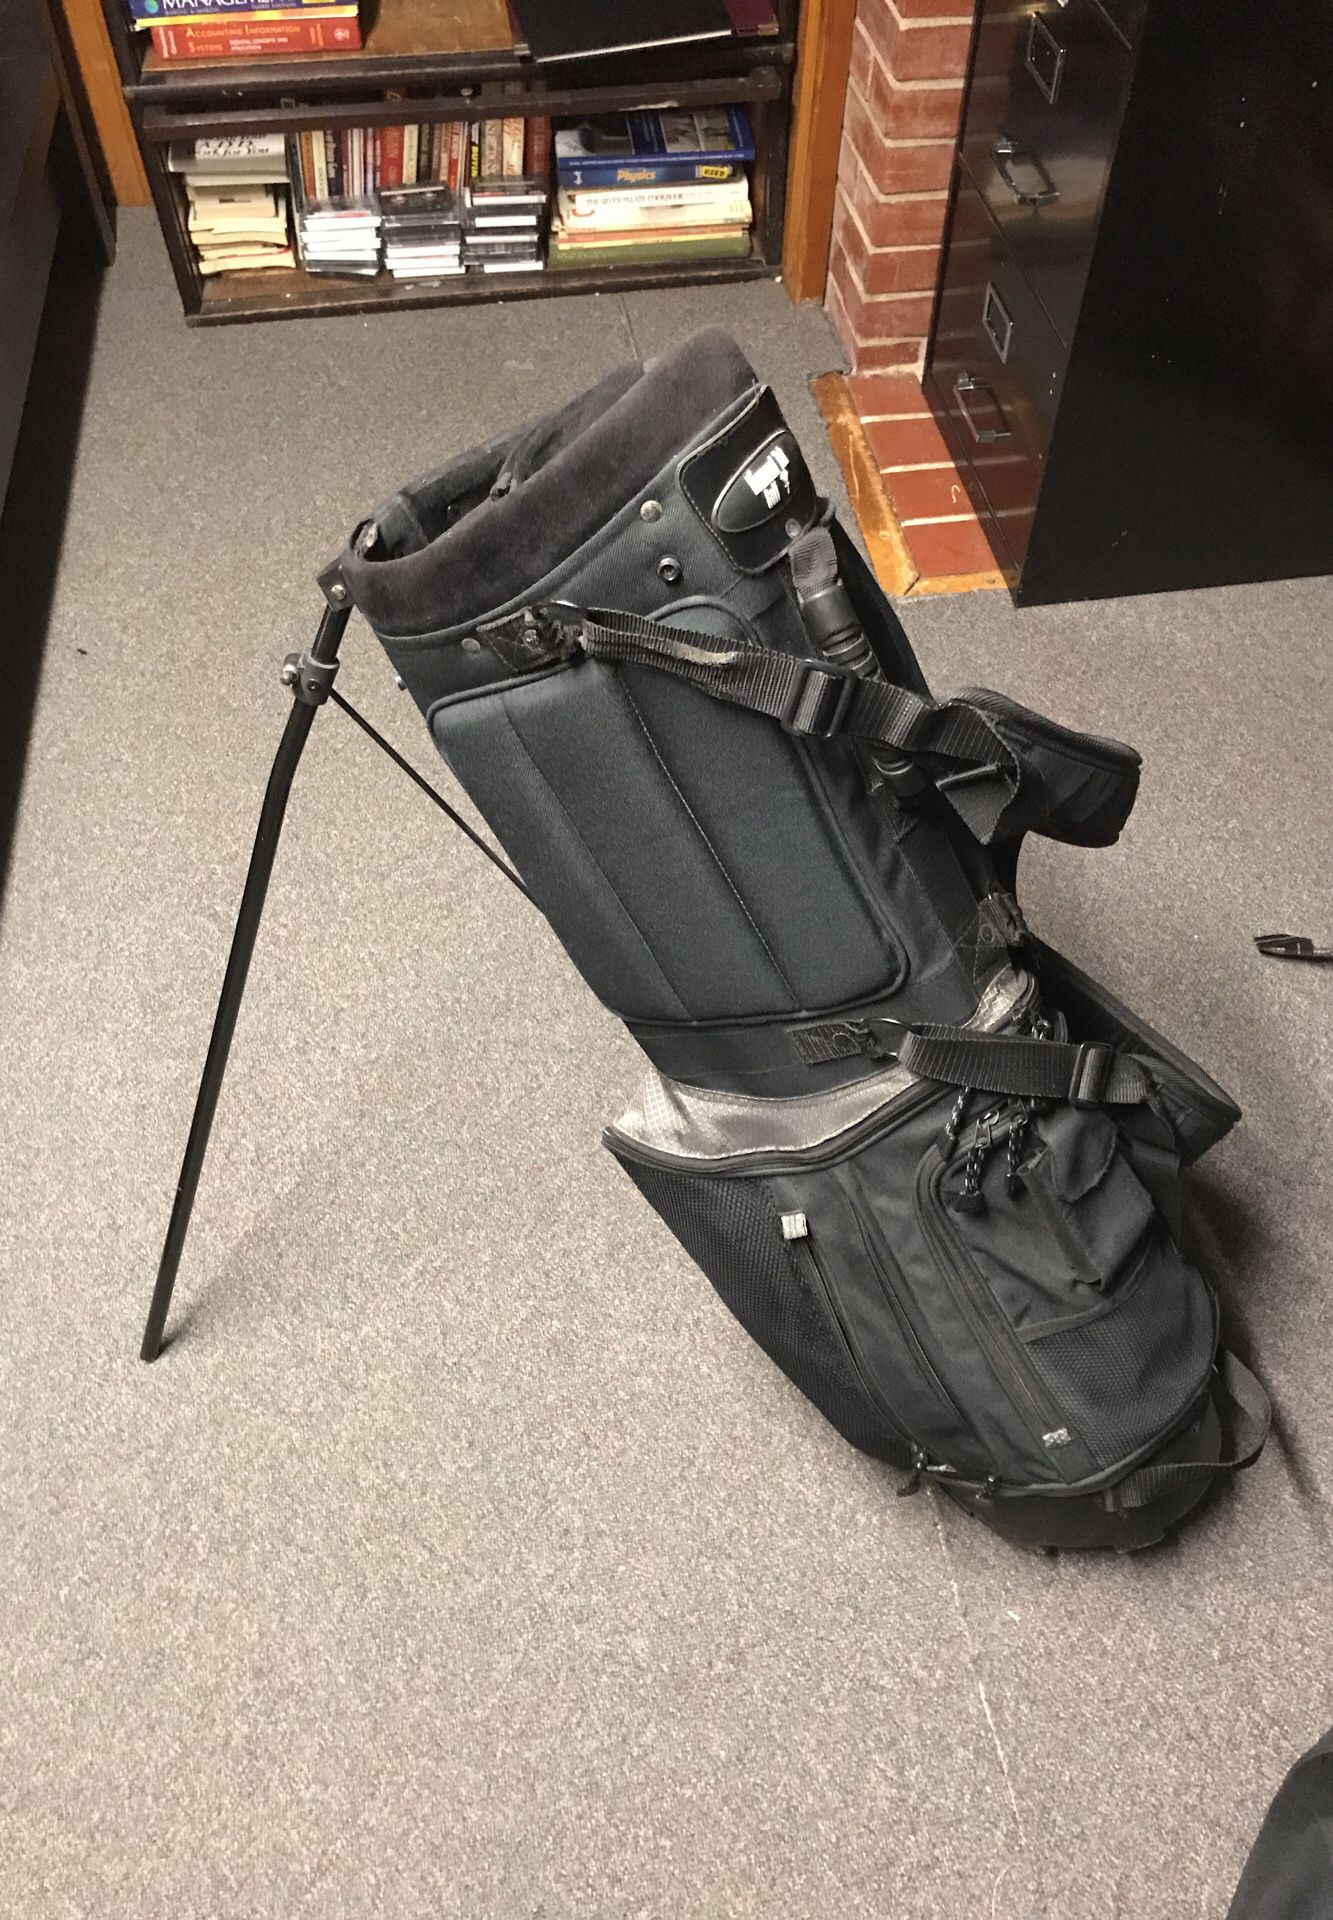 CALLAWAY Golf Bag with Back pack Straps